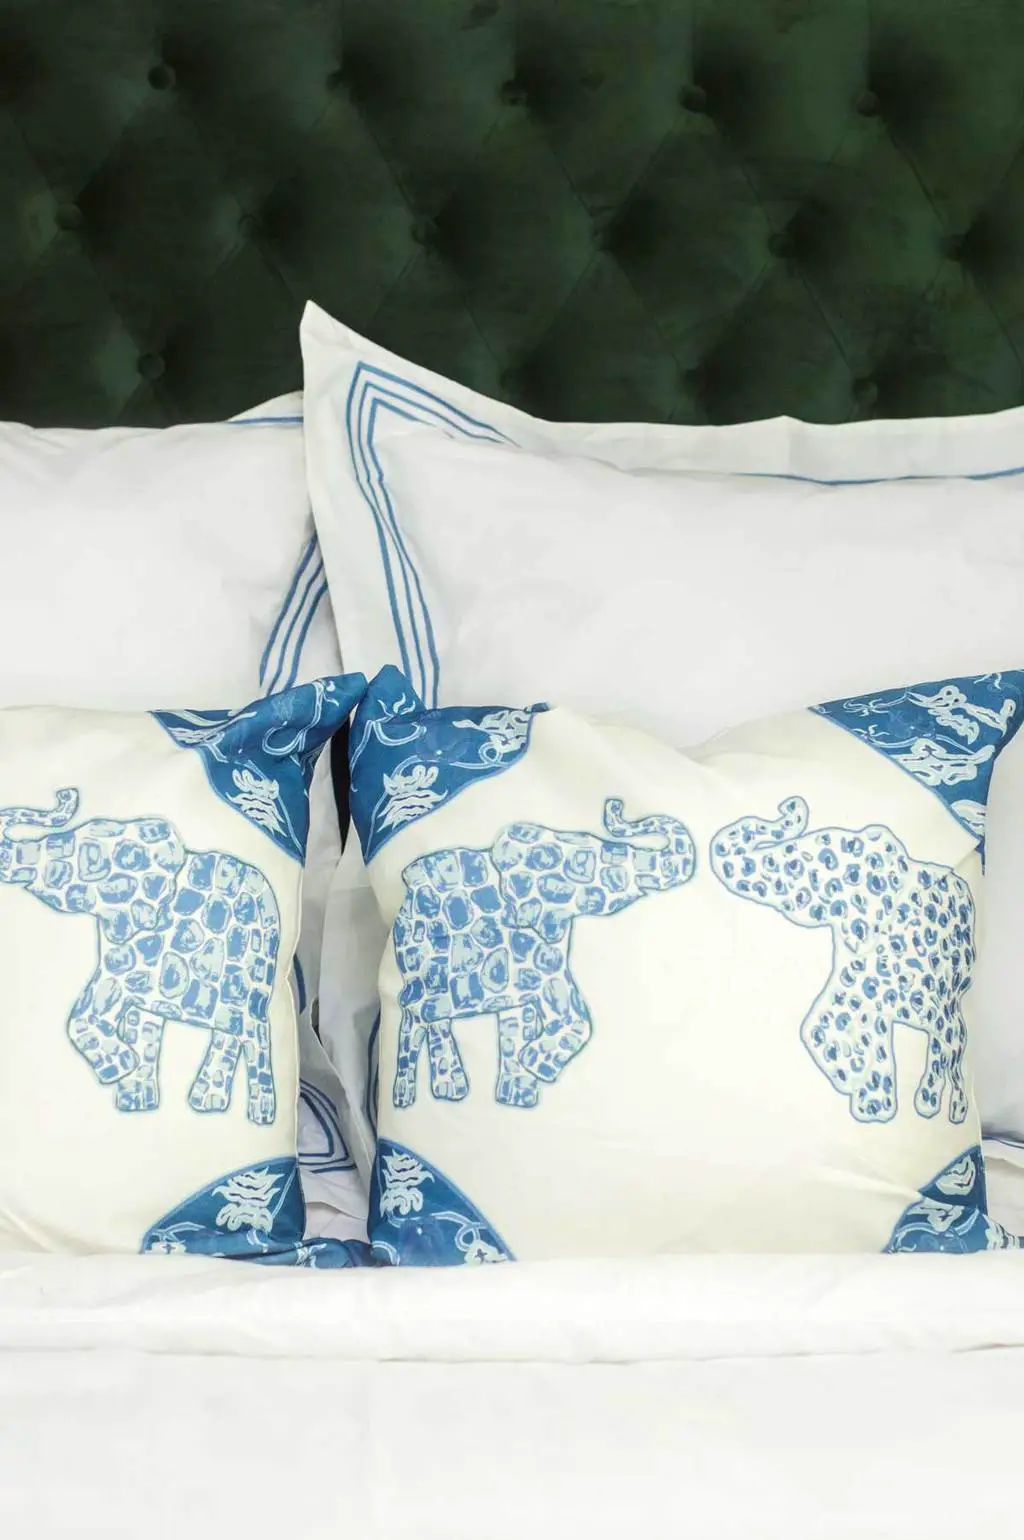 Blue and white Elephant pillows by Shelby Dillon Studio on Thou Swell @thouswellblog